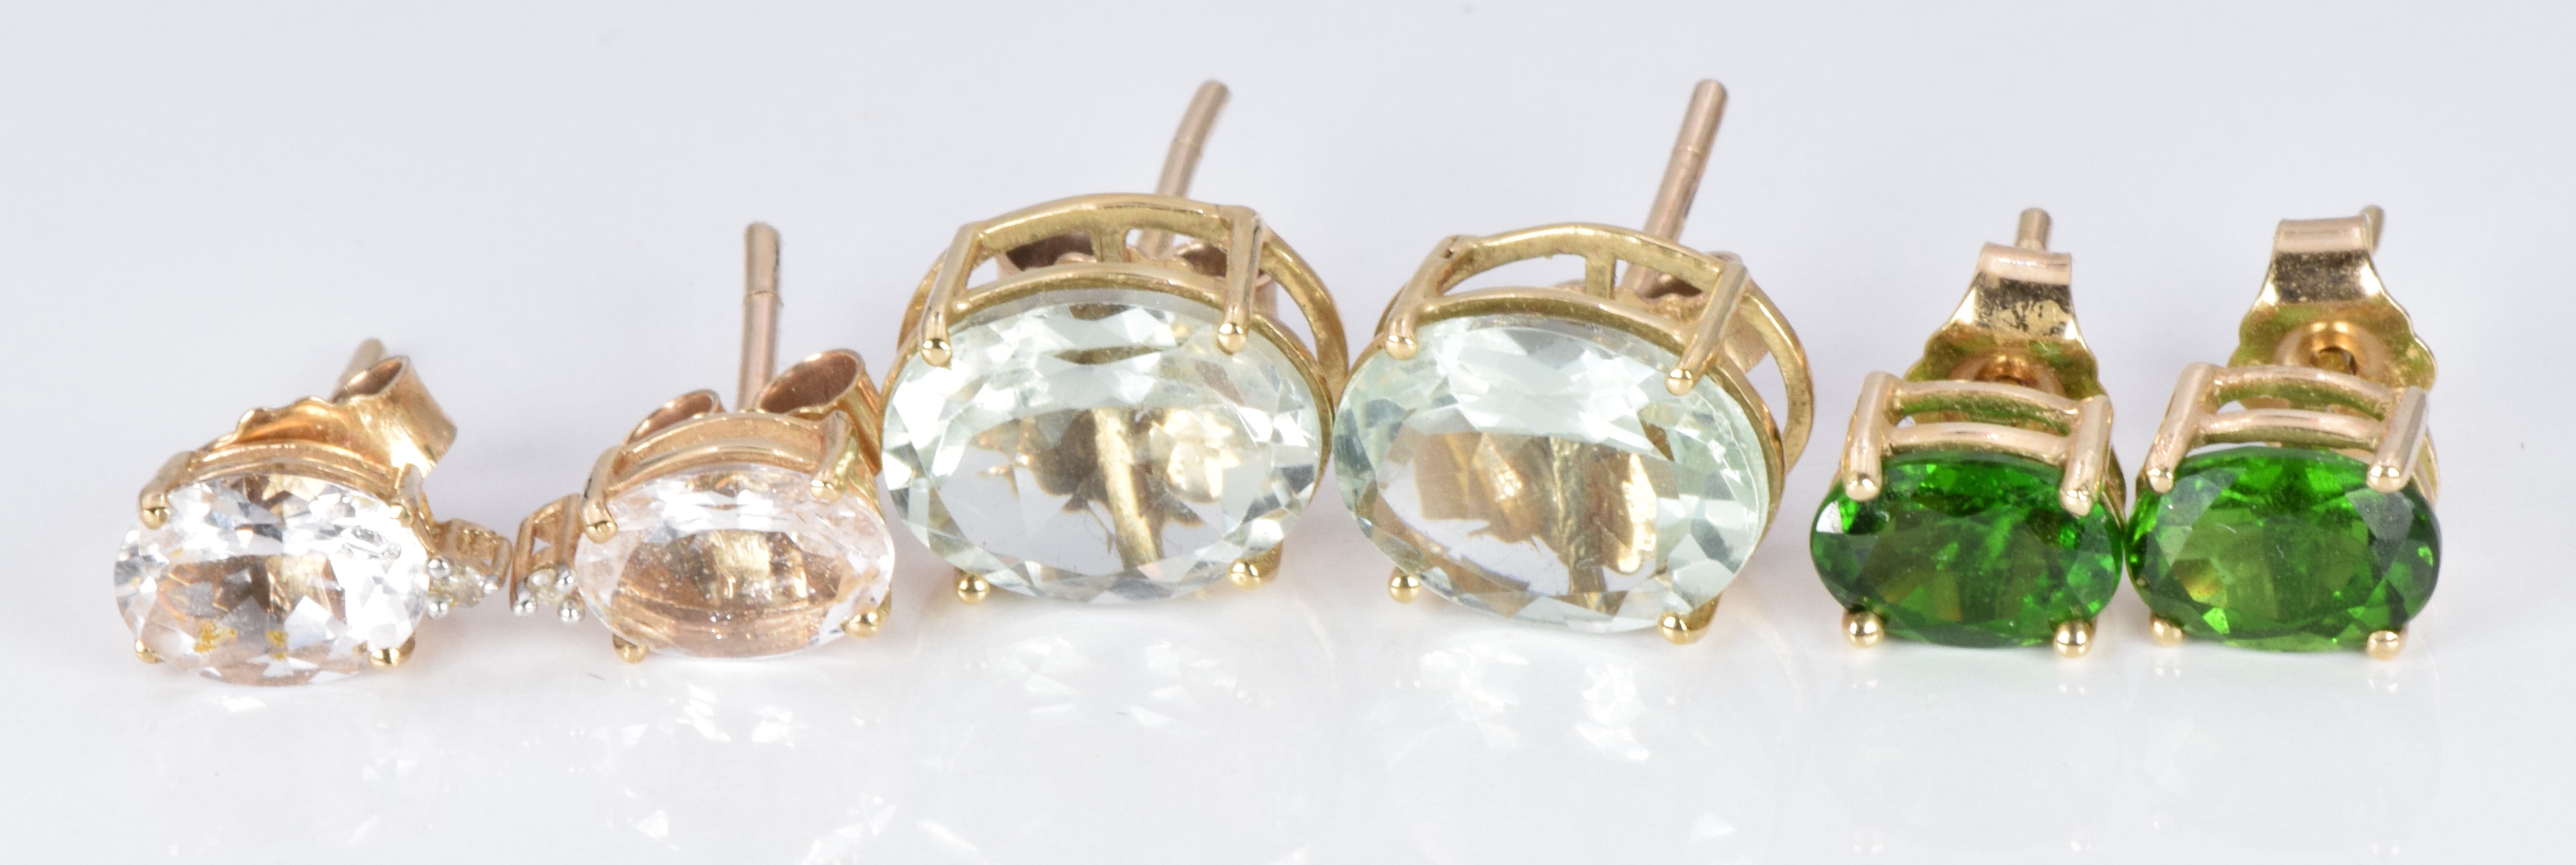 Three pairs of 9ct gold earrings set with aquamarine, tourmaline and zircons - Image 2 of 2